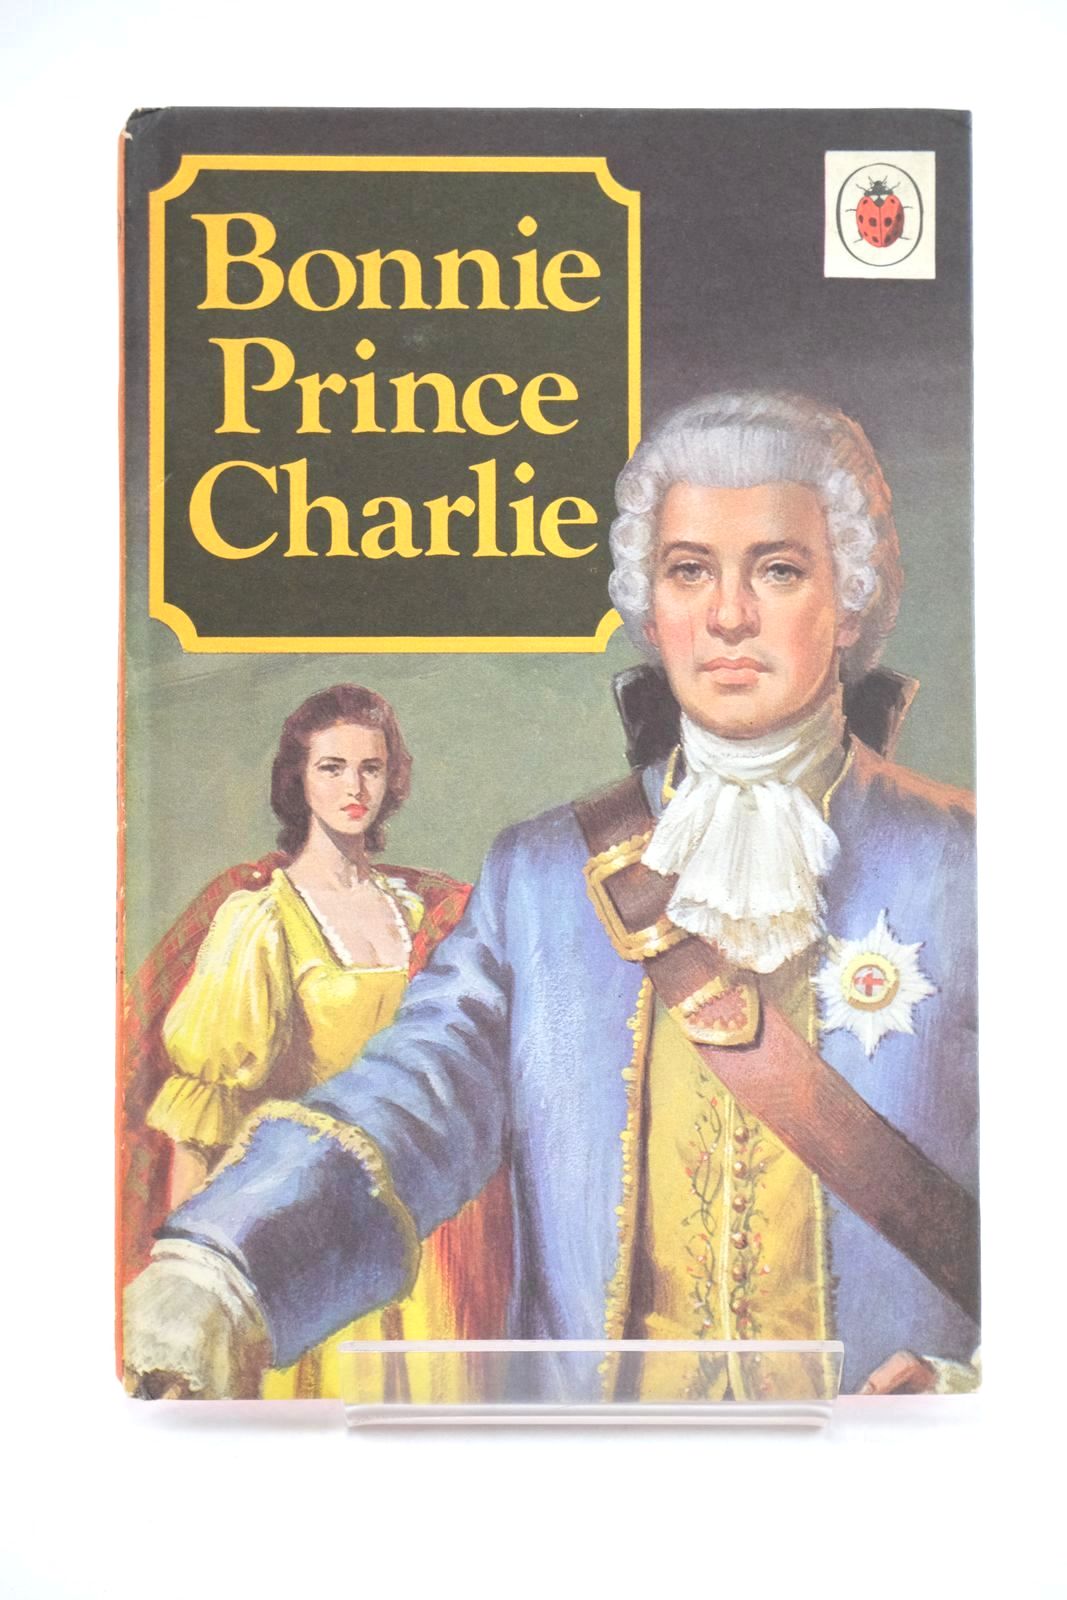 Photo of BONNIE PRINCE CHARLIE written by Peach, L. Du Garde illustrated by Hall, Roger published by Ladybird Books Ltd (STOCK CODE: 1324399)  for sale by Stella & Rose's Books